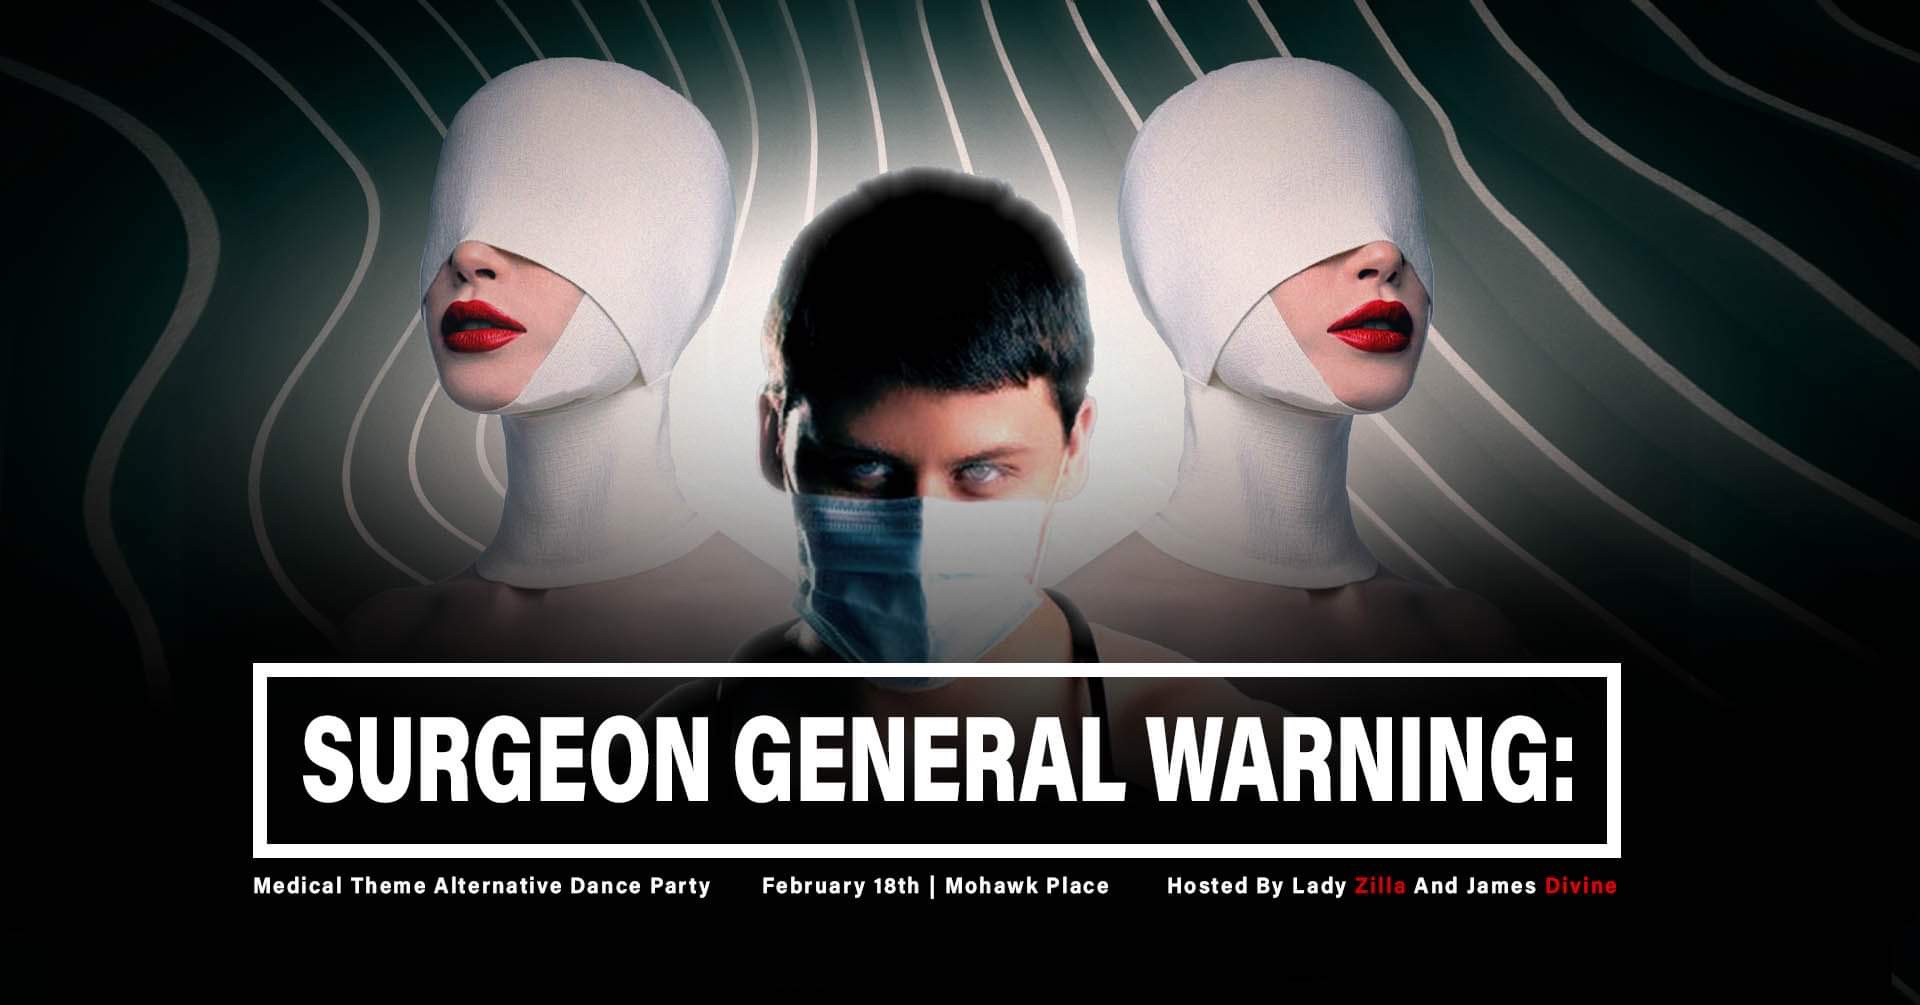 Hell’s Harlots present: Surgeon General Warning - Buffalo Mohawk Place, Live Music Venue, Band Live event